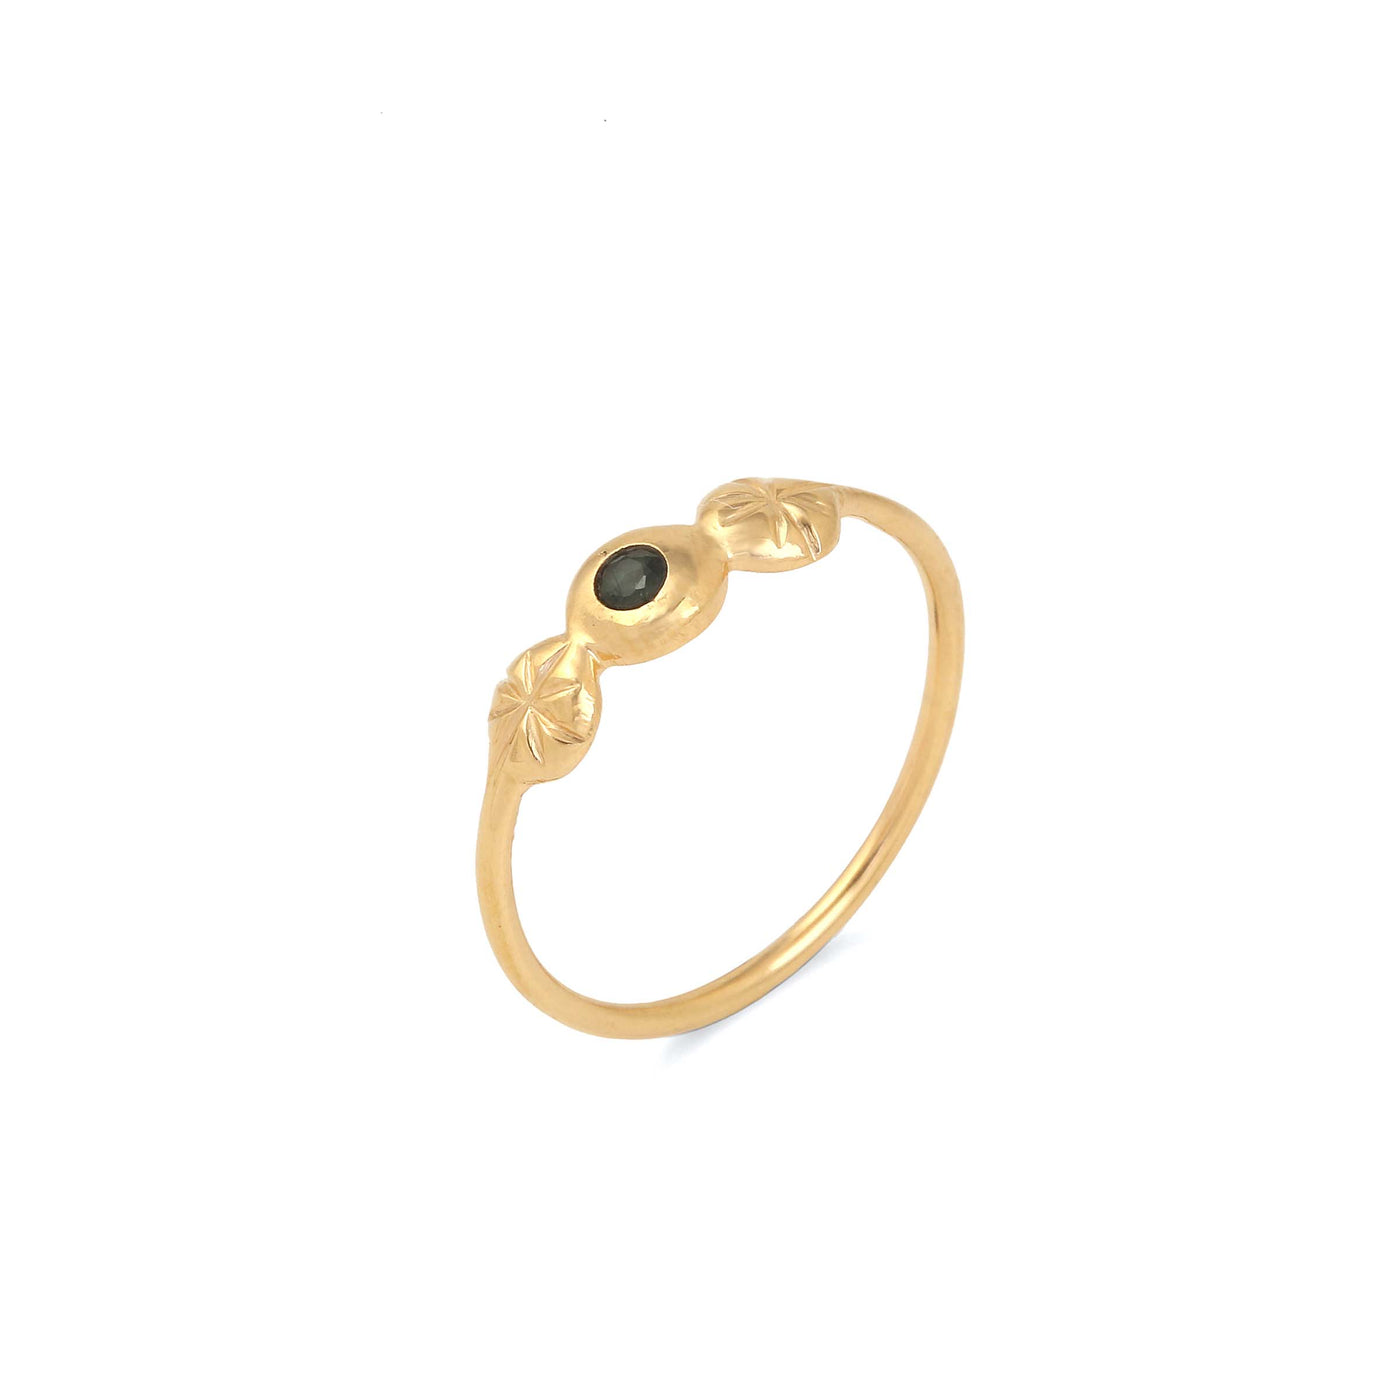 Medina ring in 14 KT solid gold with green sapphire